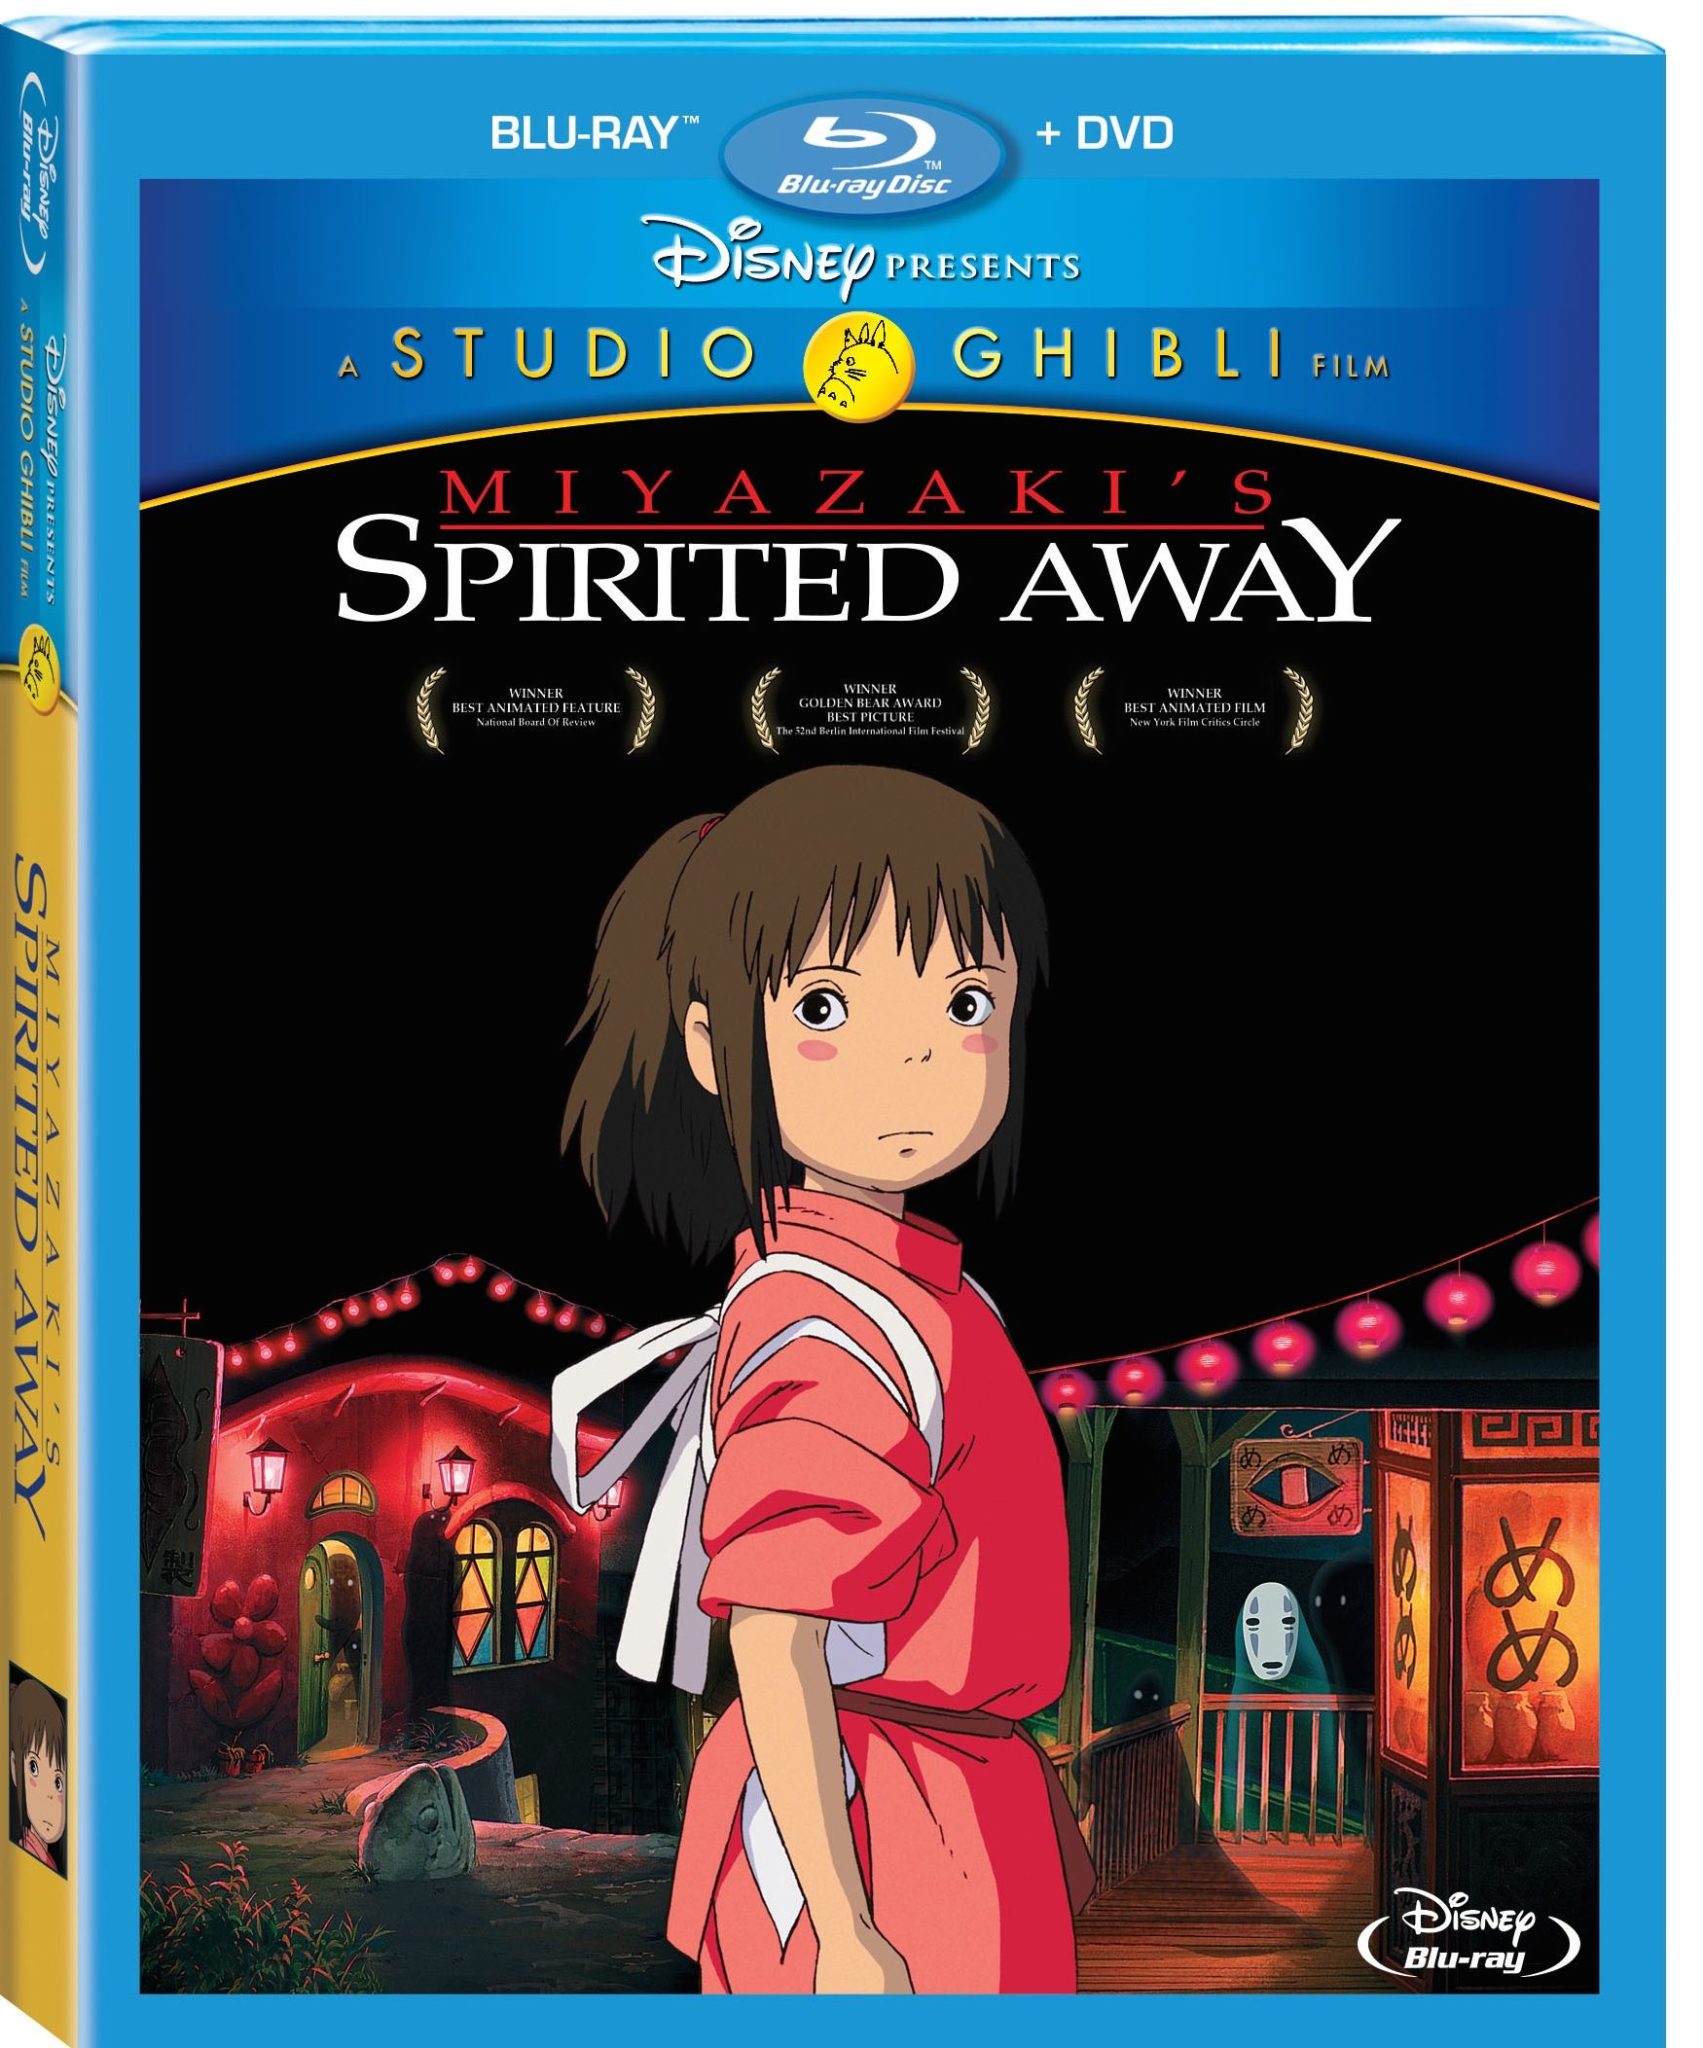 BLU-RAY REVIEW] 'Spirited Away' Blu-ray is Worth Every Penny - Rotoscopers